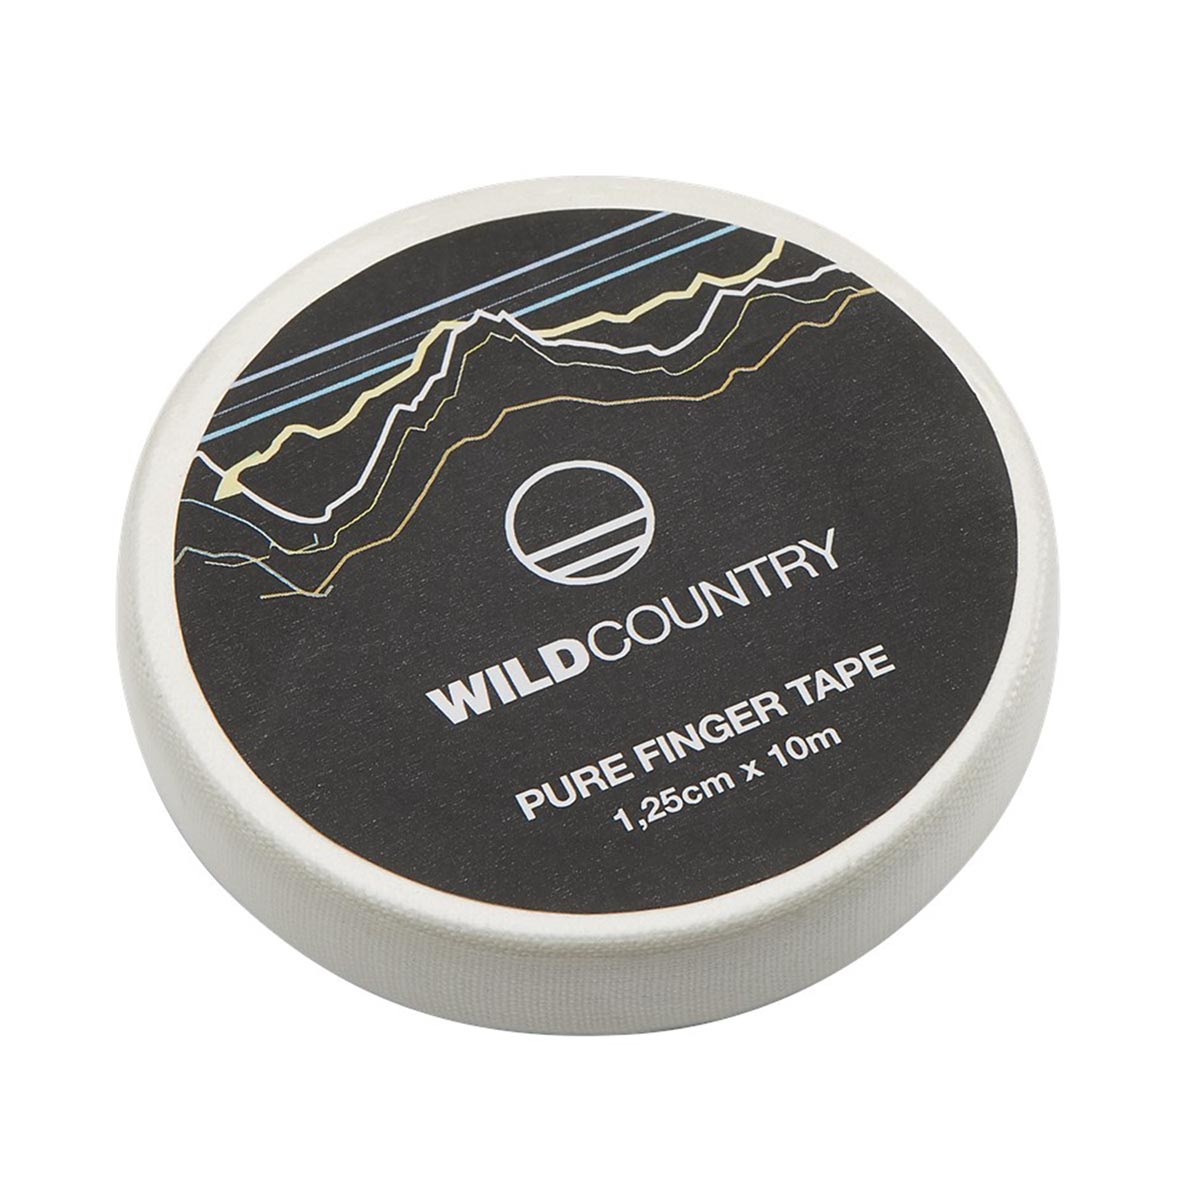 WILD COUNTRY - PURE FINGER TAPE 1,25CM X 10M